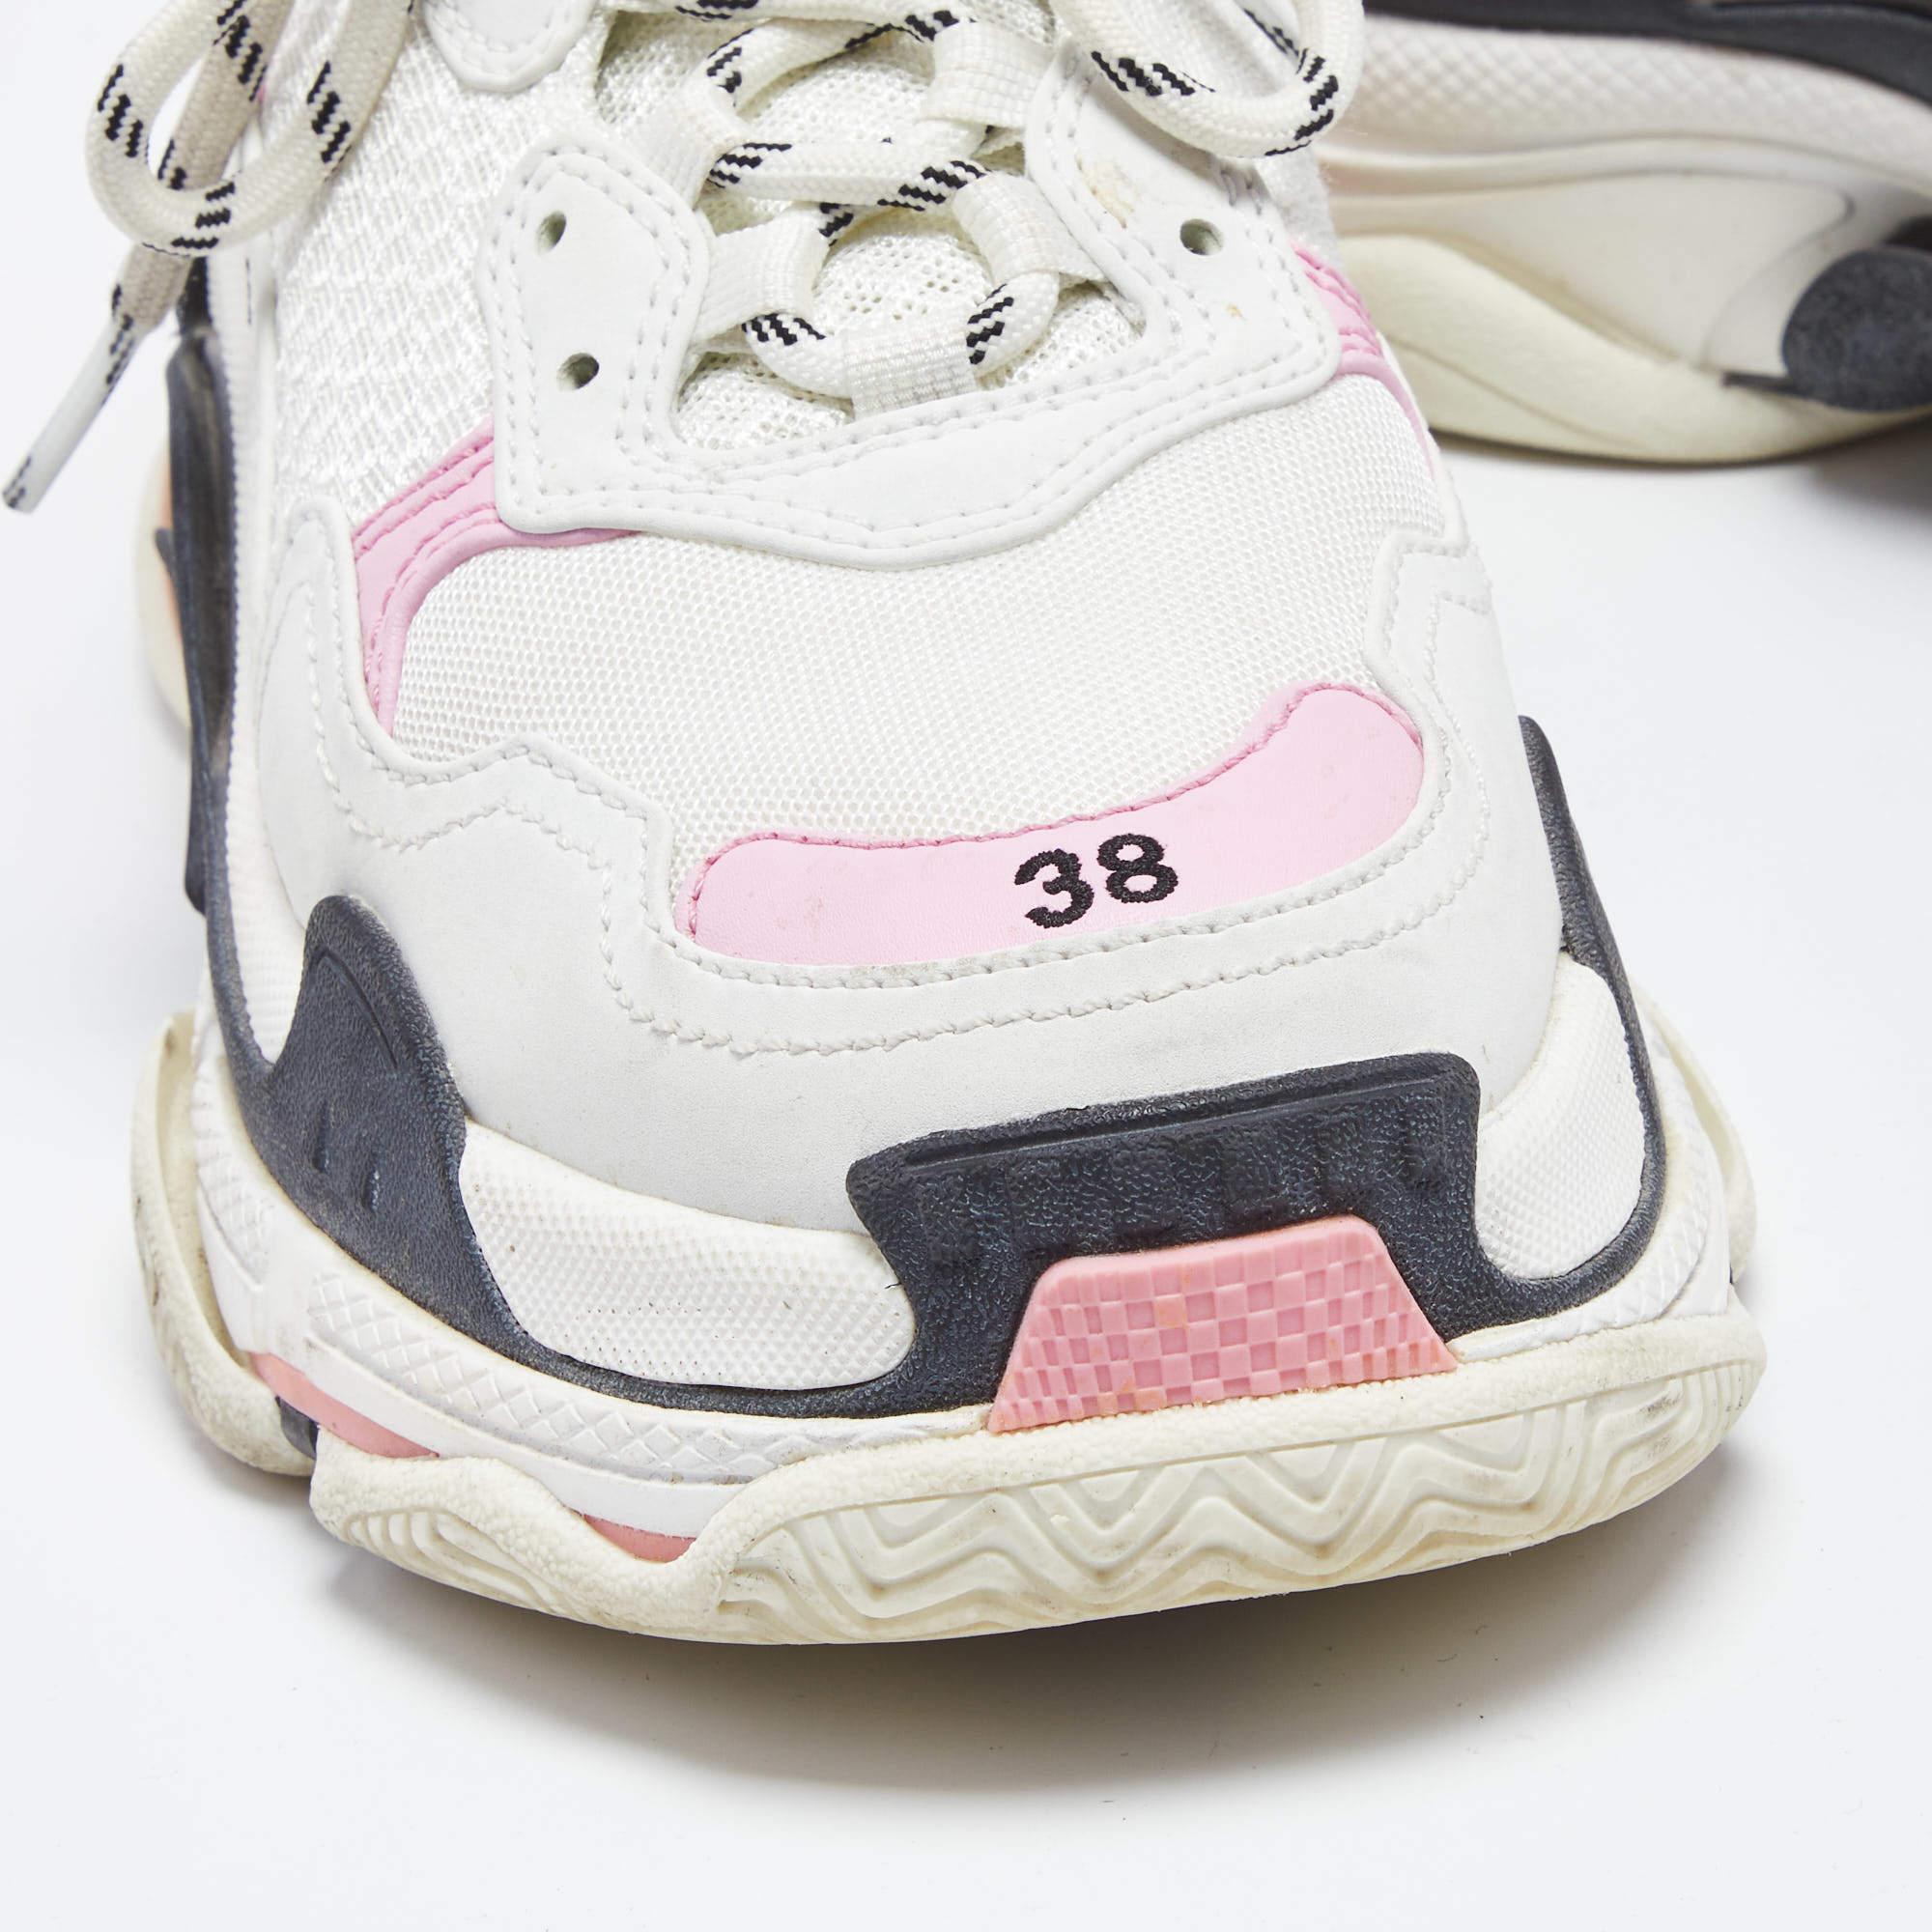 Balenciaga White/Pink Leather and Mesh Triple S Sneakers Size 38 2